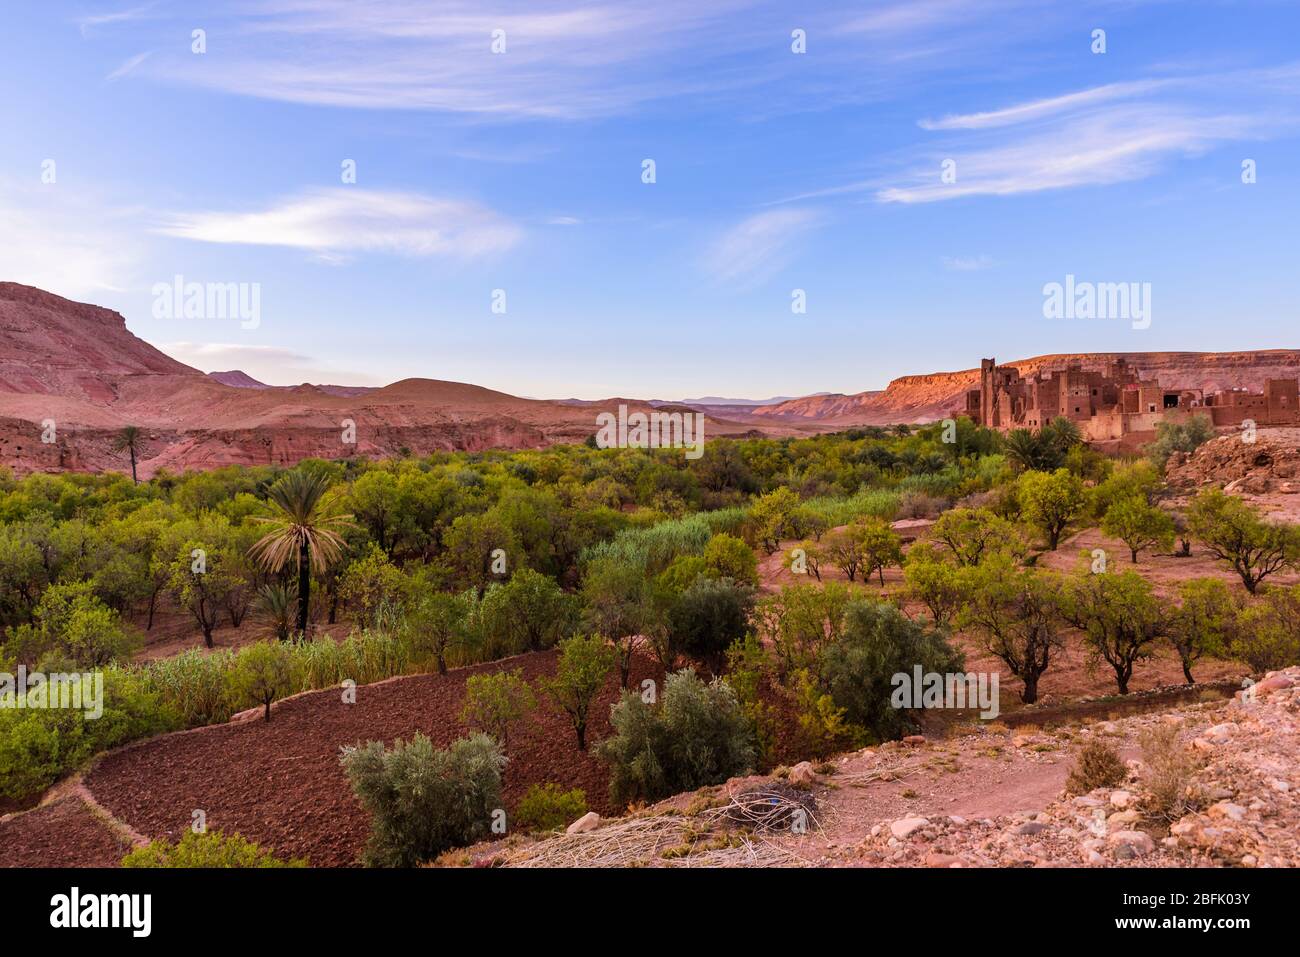 Abandoned Kasbah in the Valley, Morroco Stock Photo